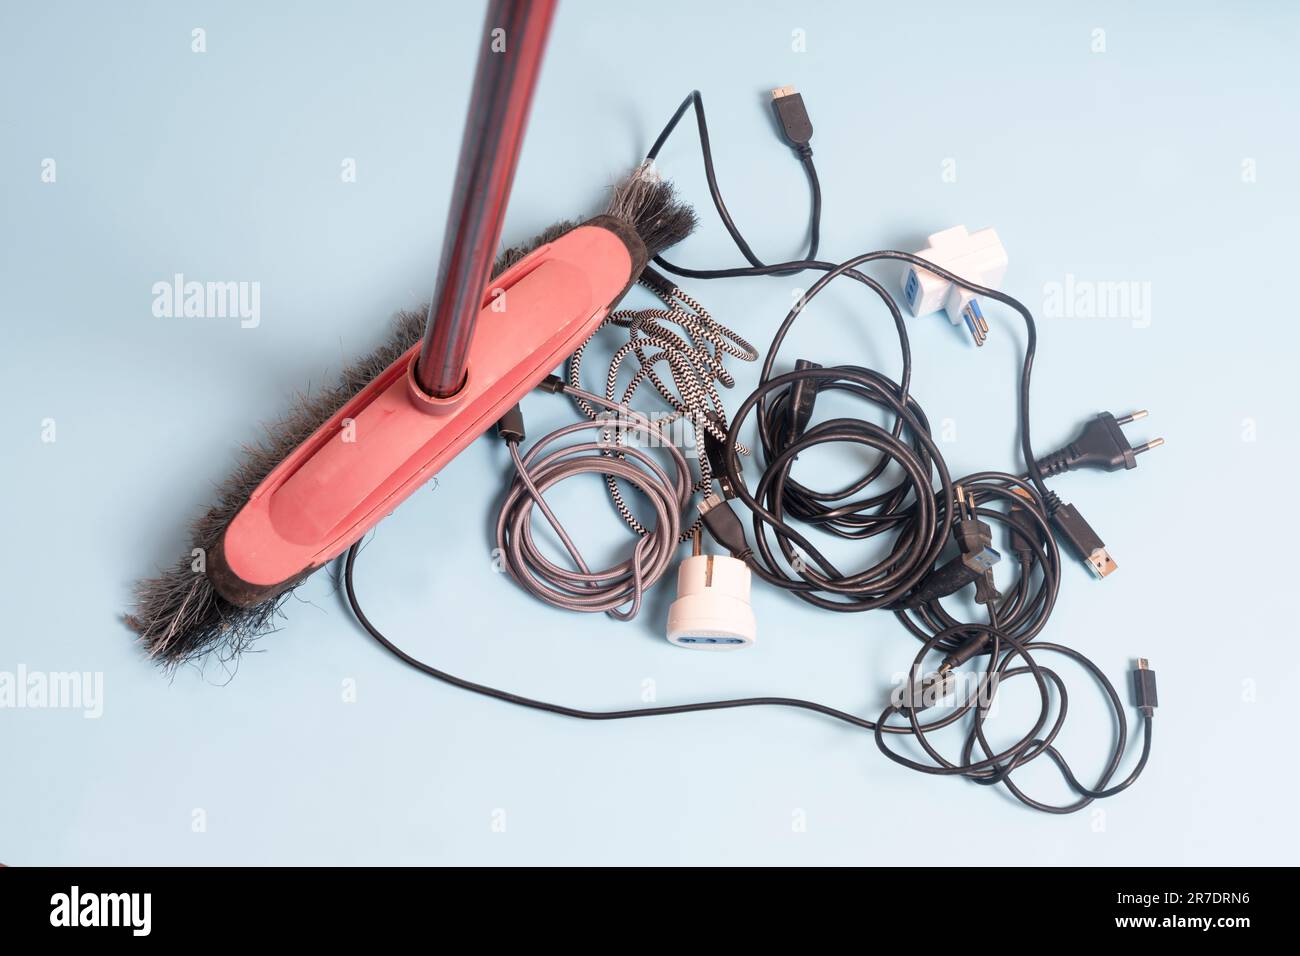 a broom collects a tangle of old electric cables on the floor Stock Photo